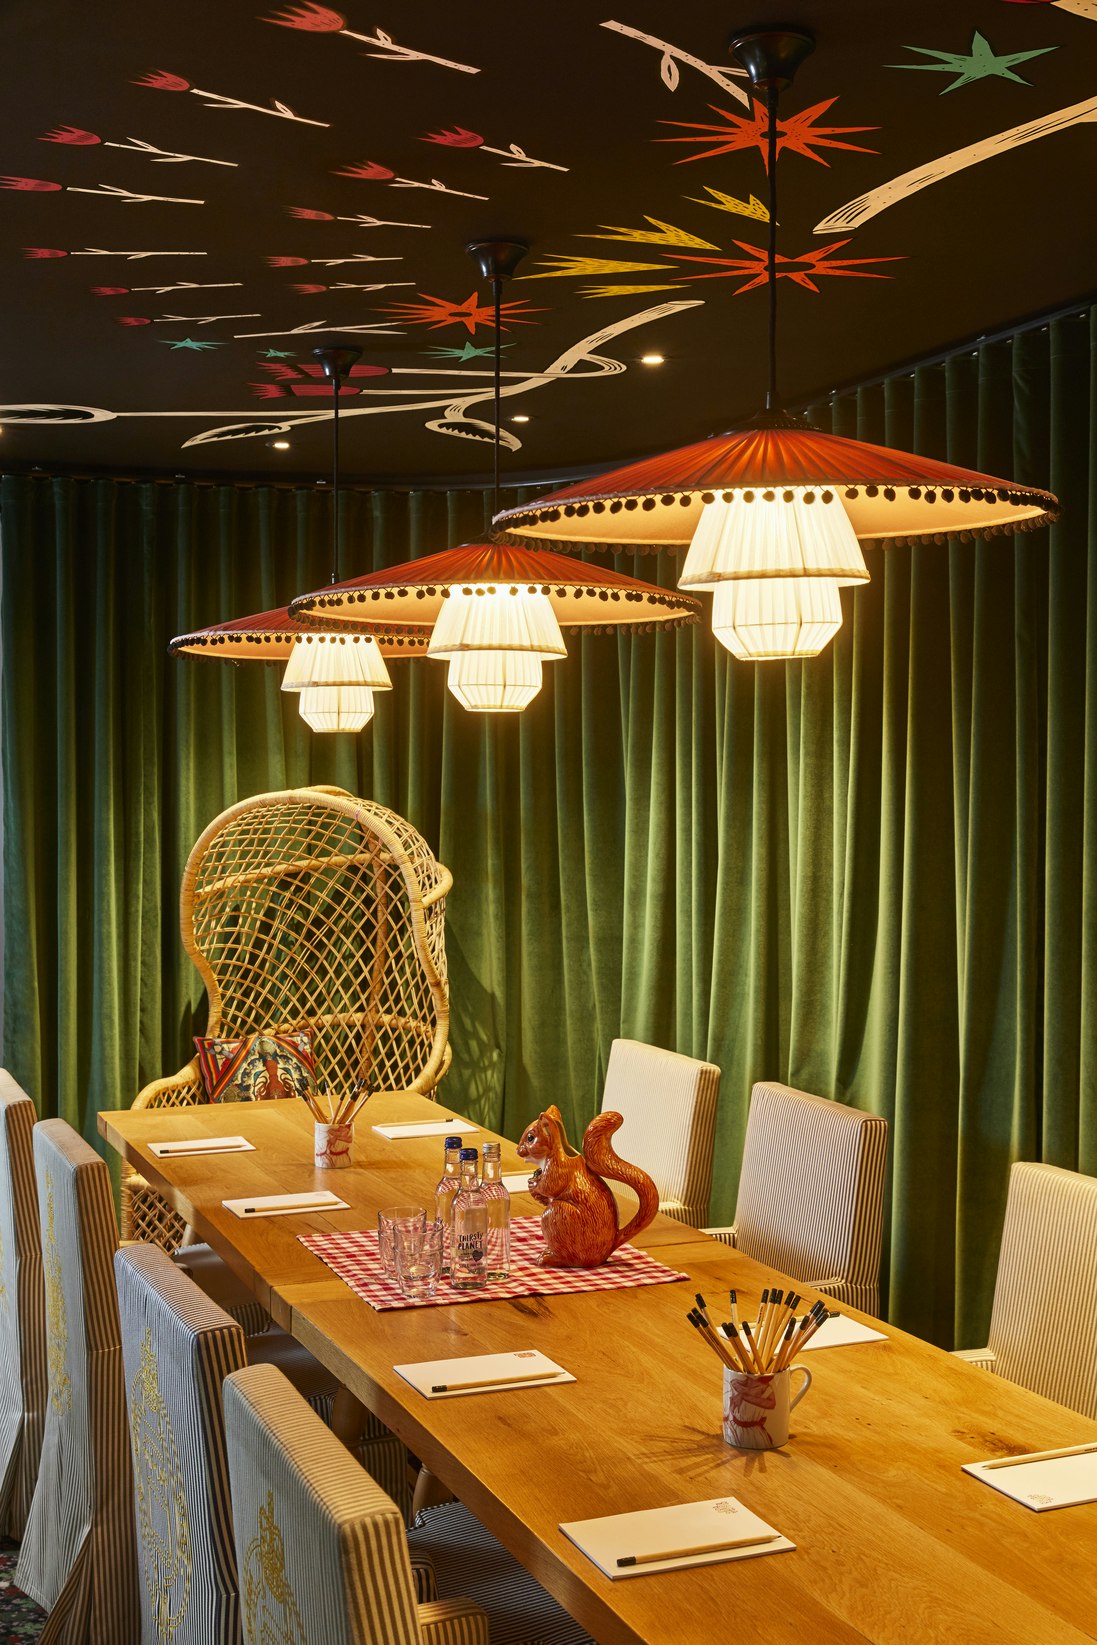 Mama Shelter London - Private Dining Room image 4